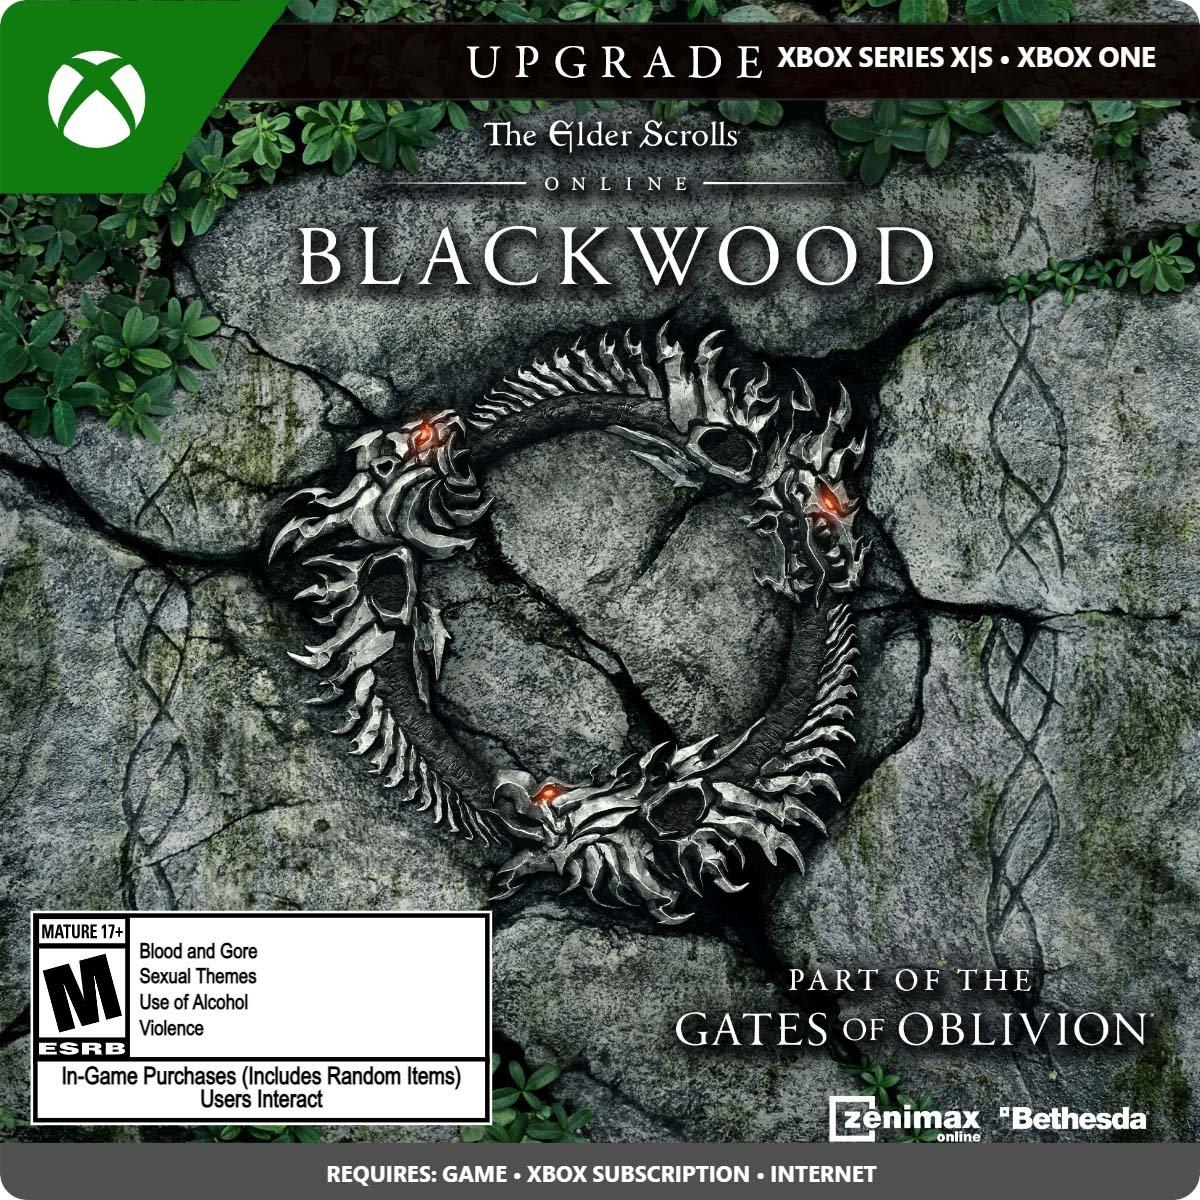 The Elder Scrolls Online Collection: Blackwood Upgrade DLC for Xbox One